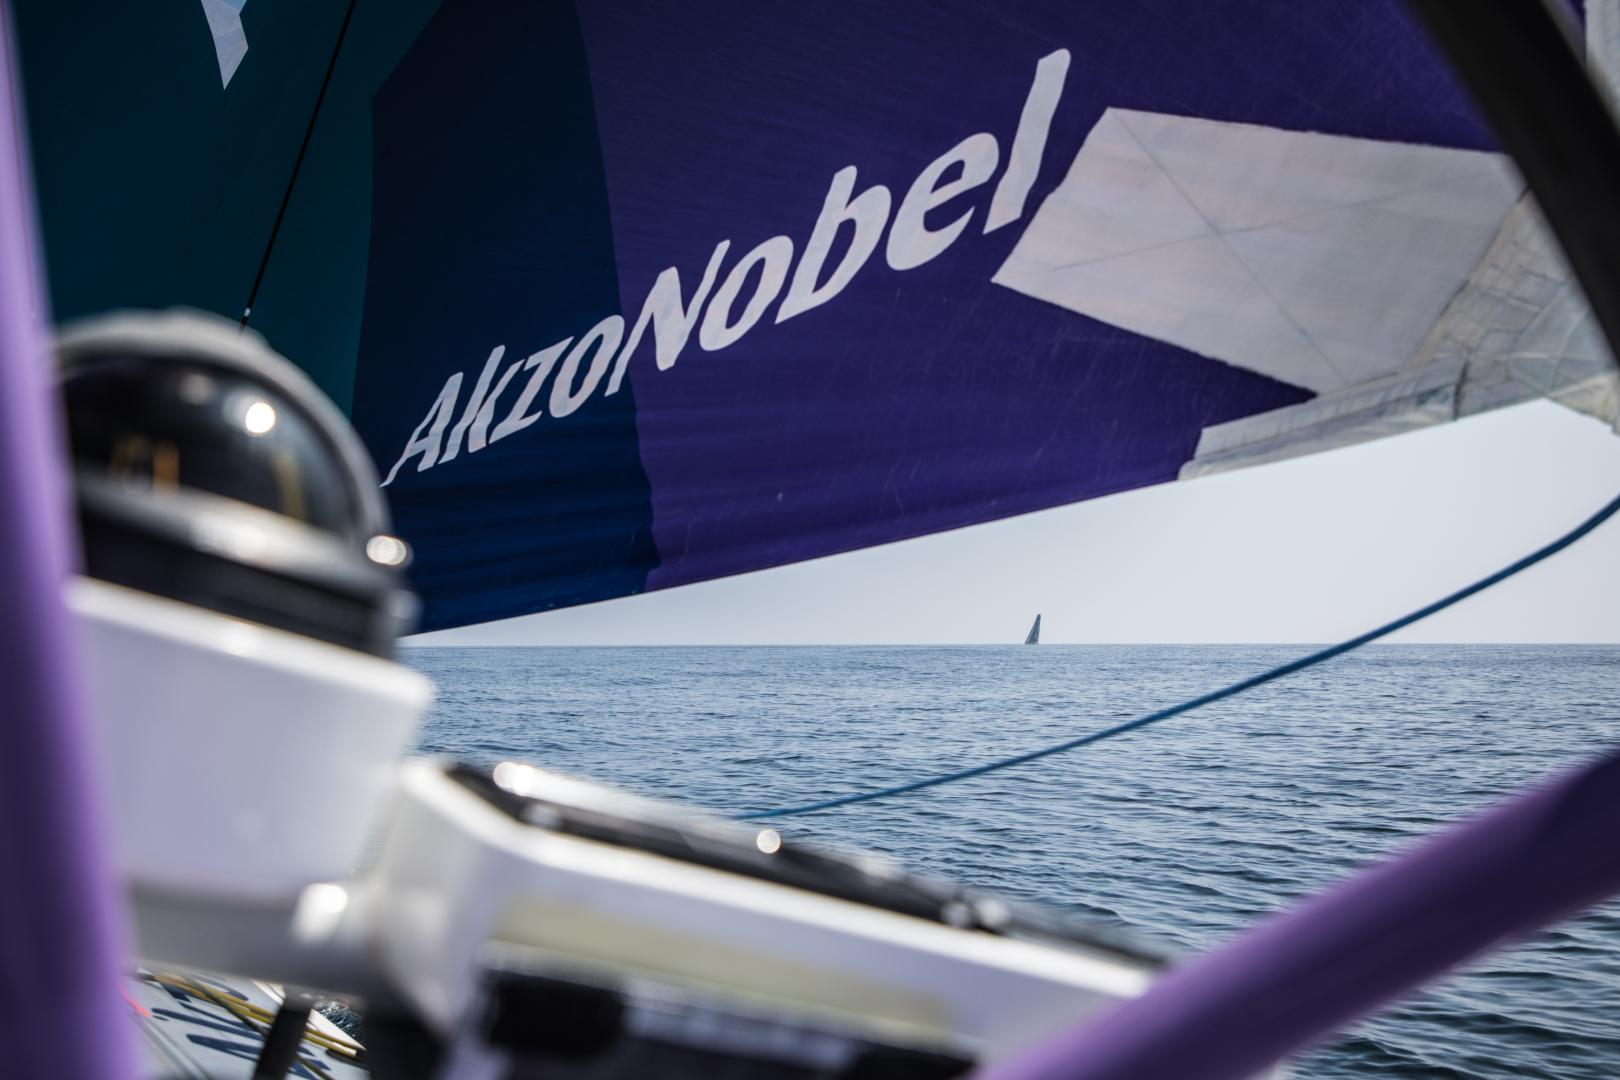 AkzoNobel has repurchased 150,057 of its own common shares